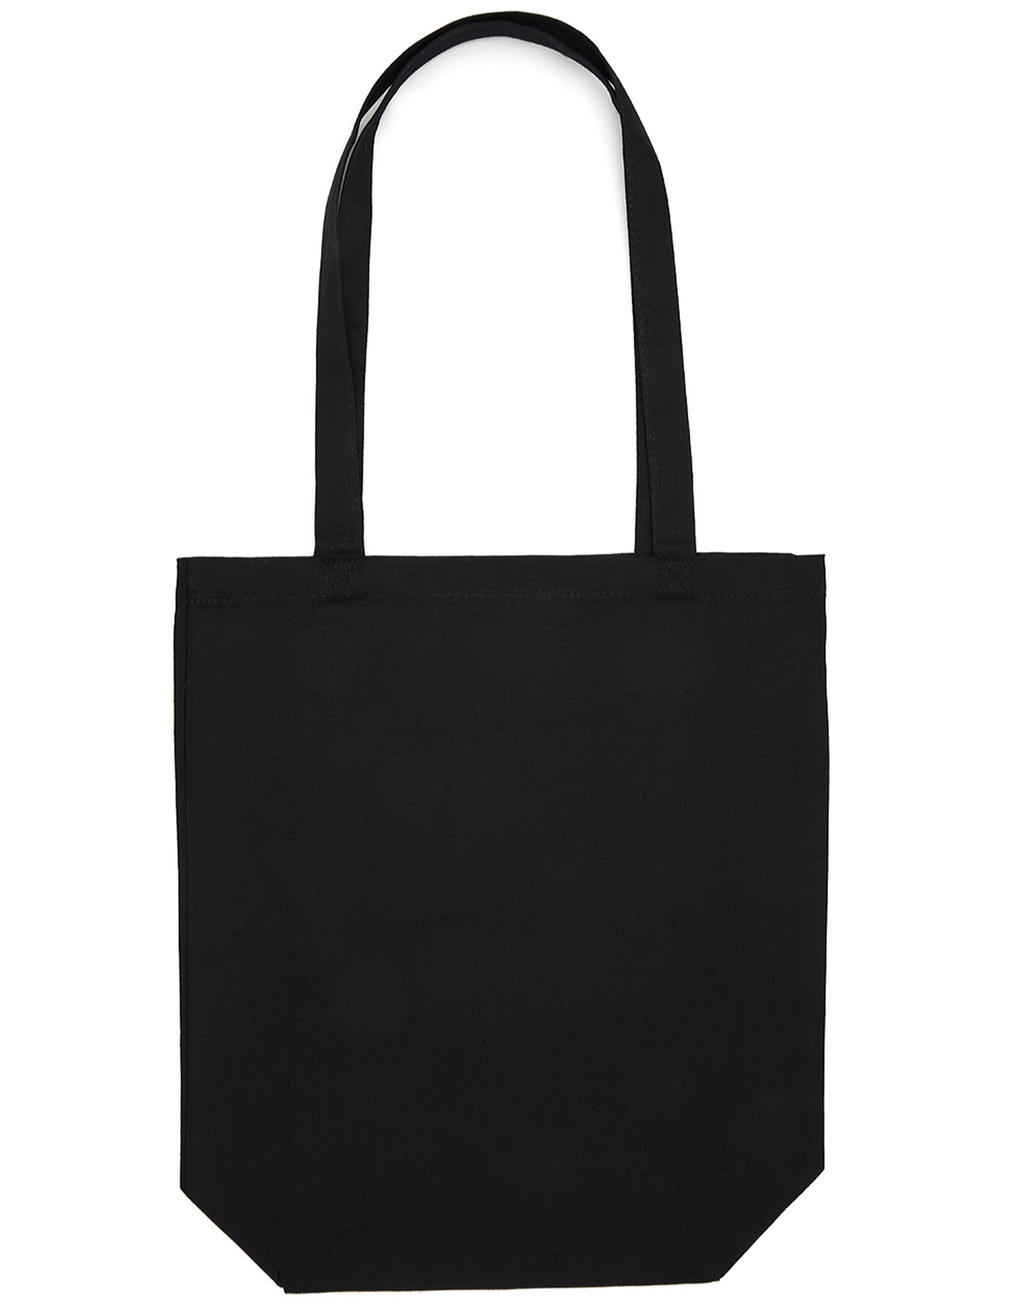  Canvas Cotton Bag LH with Gusset in Farbe Black